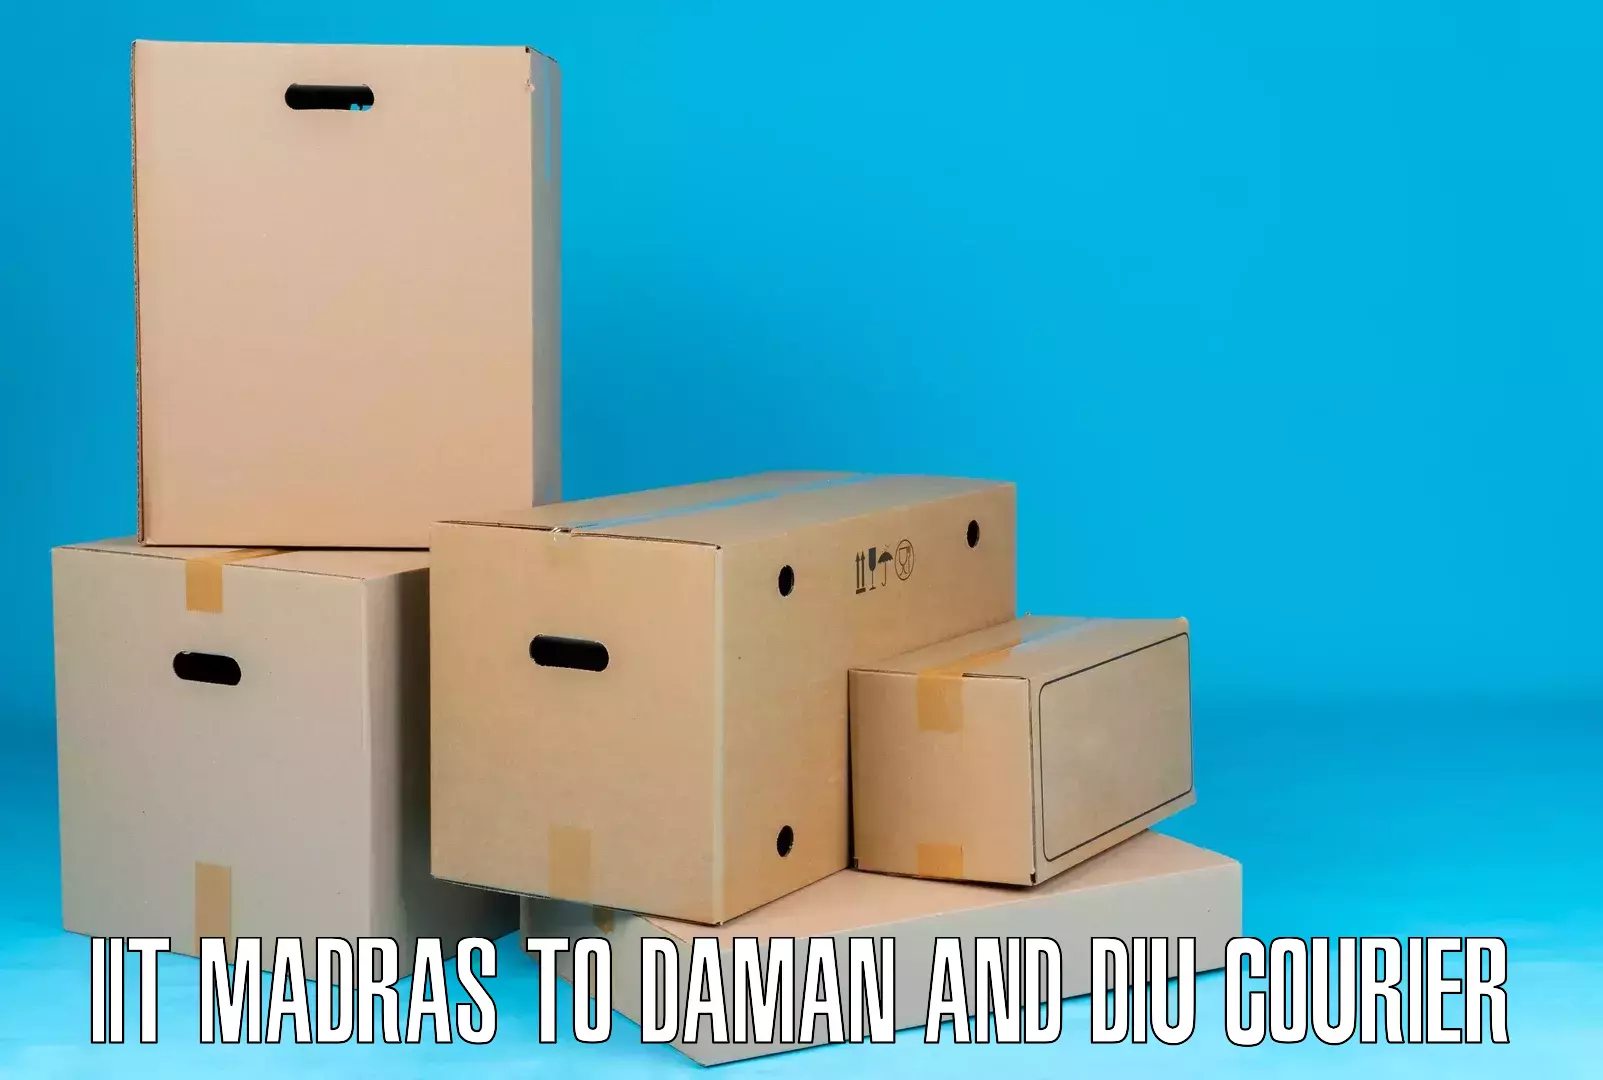 Express delivery capabilities IIT Madras to Daman